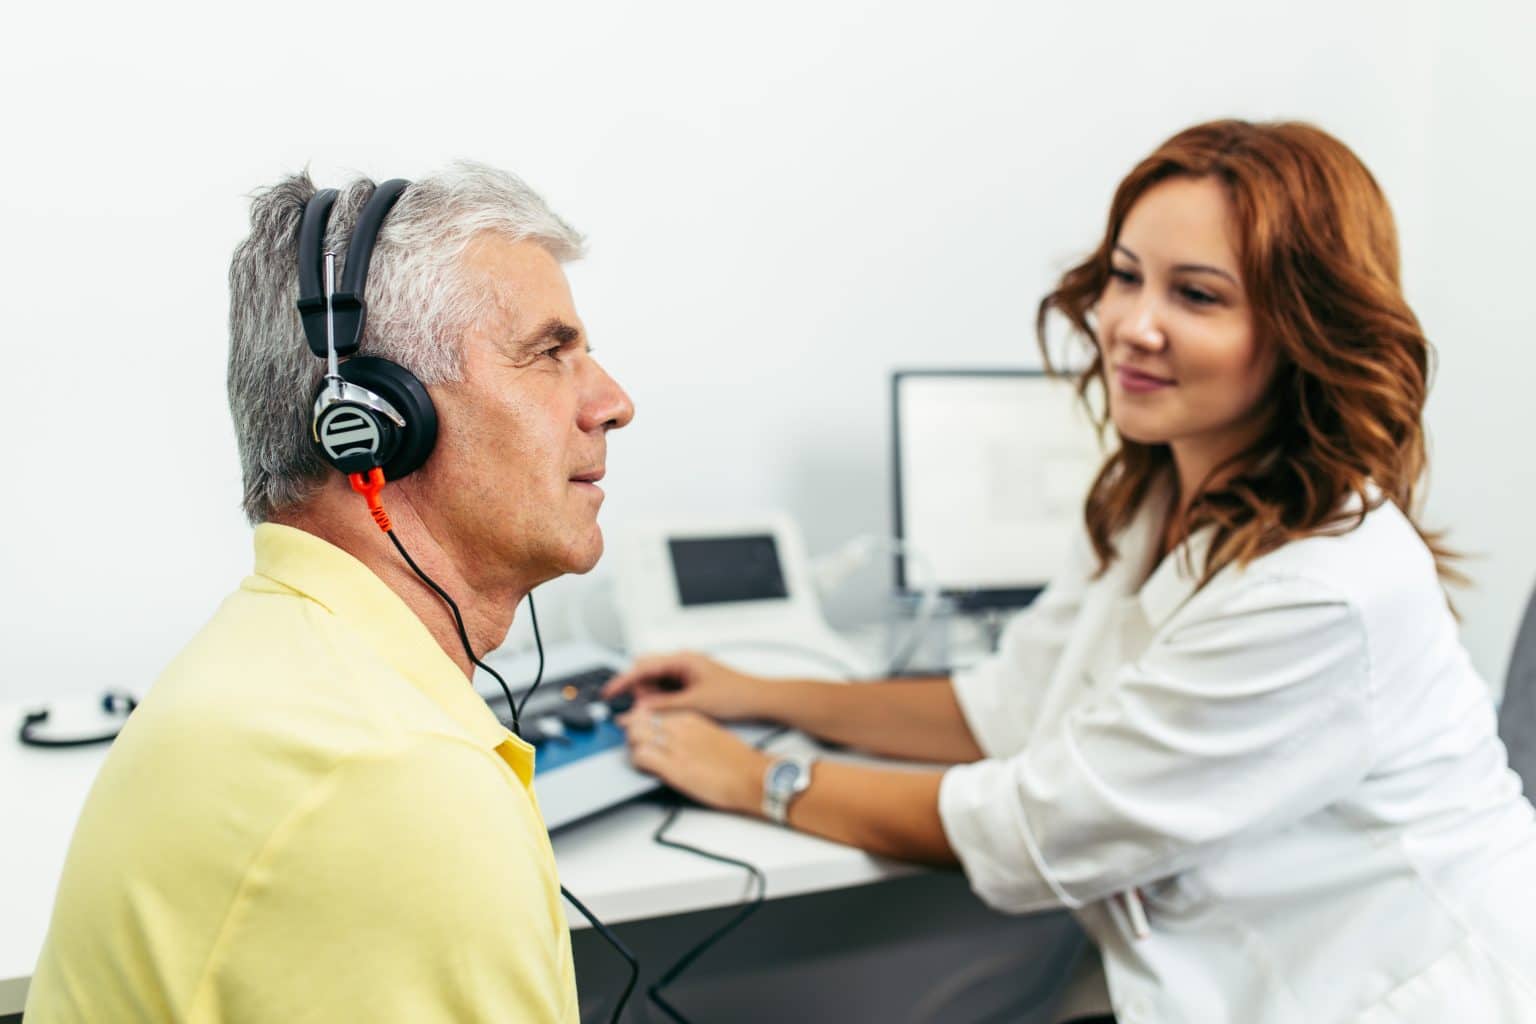 Patient with headphones on gets tested for hearing loss by an audiologist